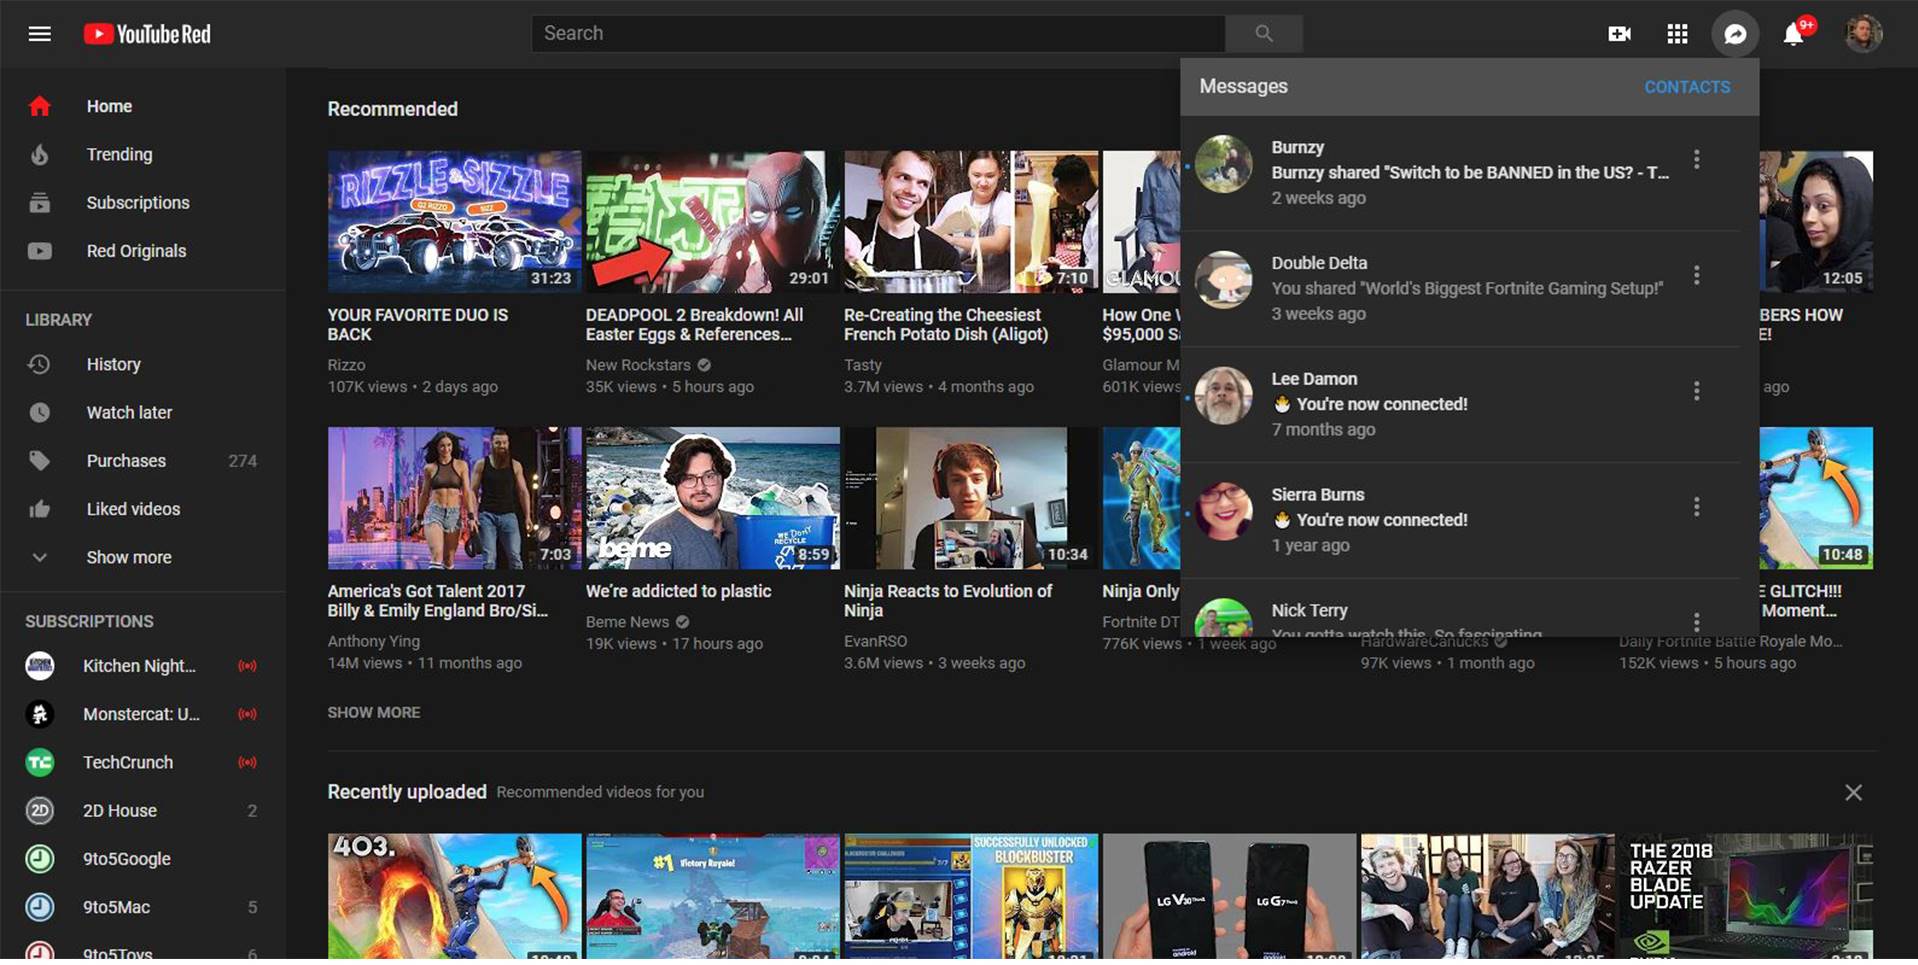 YouTube LAUNCHED Function Users 1